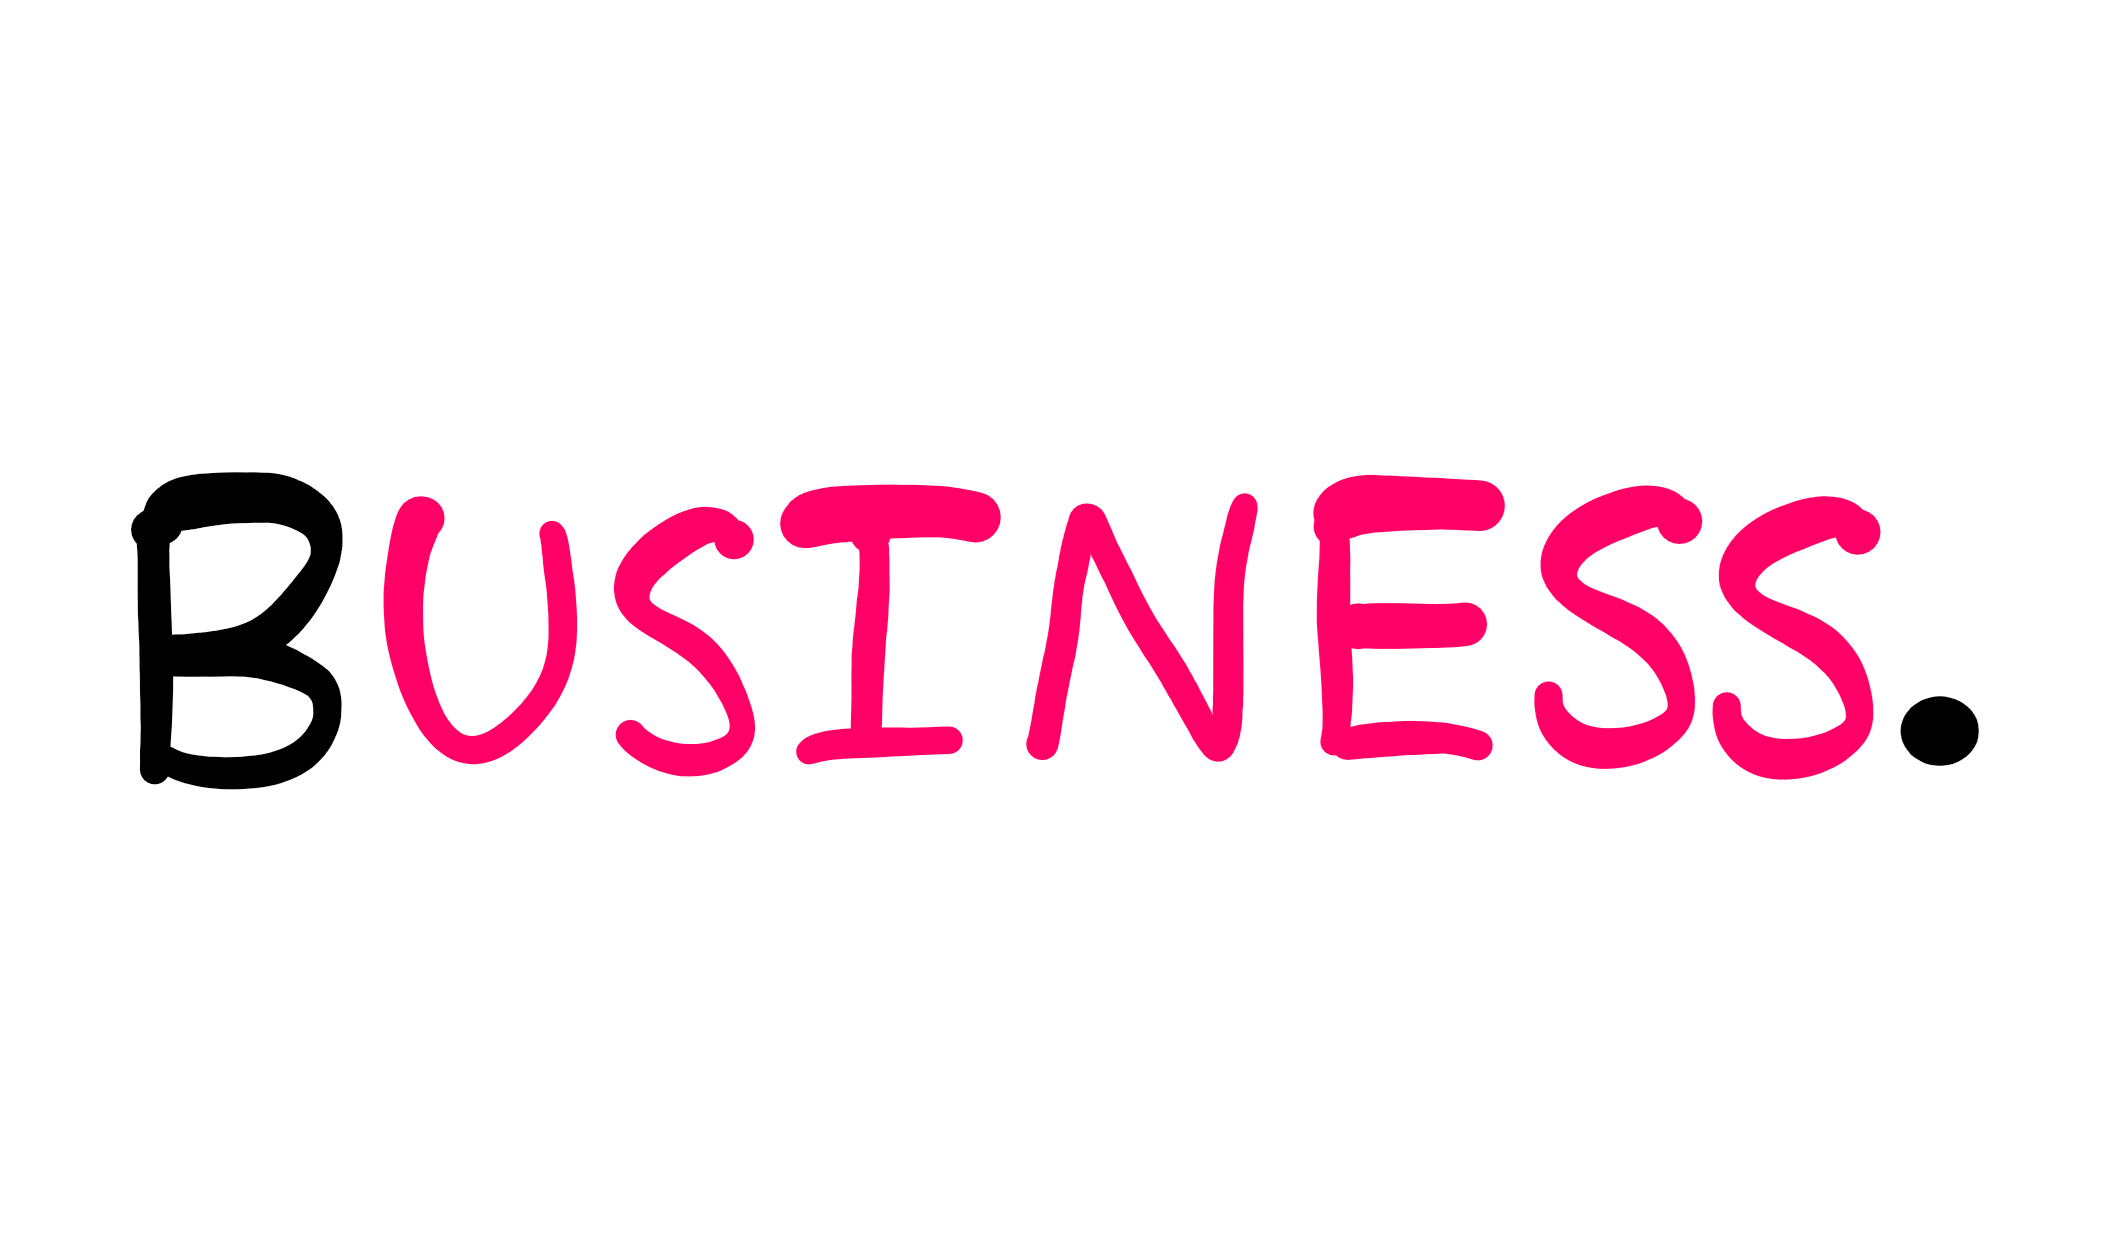 I Accidentally Almost Started A Business. Here is What Happened. - An image showing the word "Business" written in bold letters, followed by a full stop. The letter 'B' and the full stop are in black, while the rest of the letters are in pink.